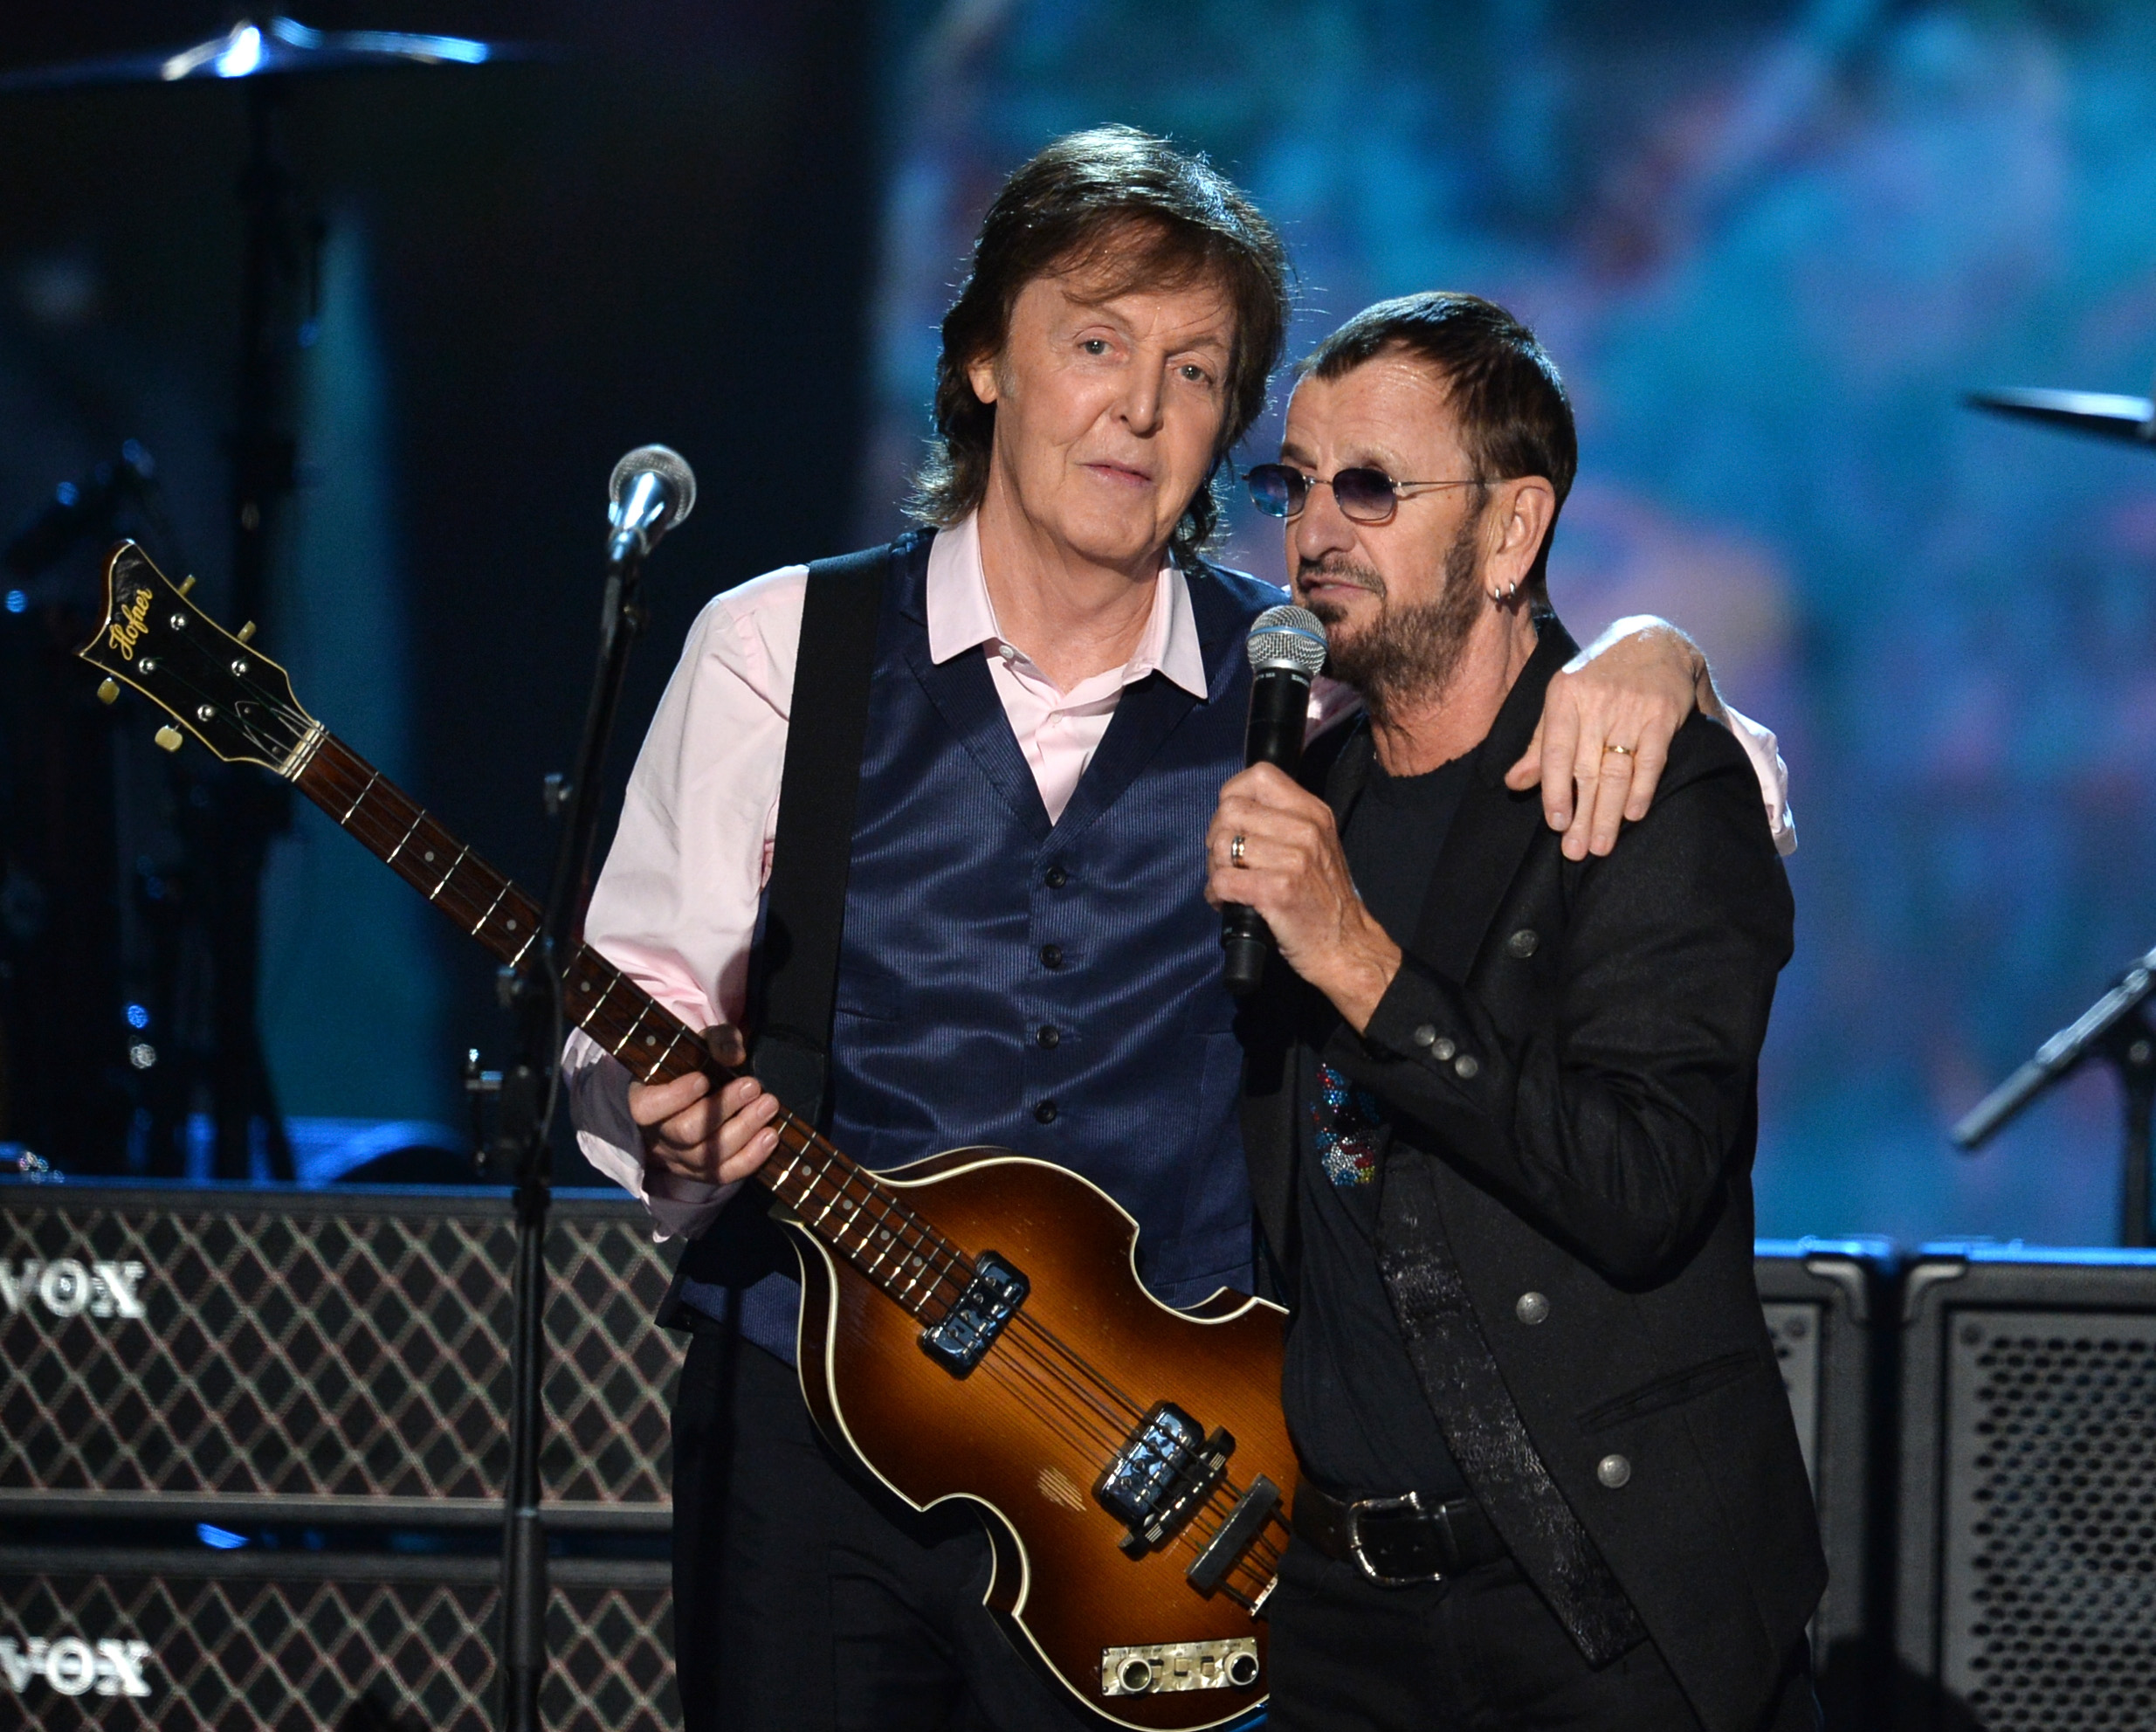 Inside The Grammys’ Epic All-Star Beatles Tribute